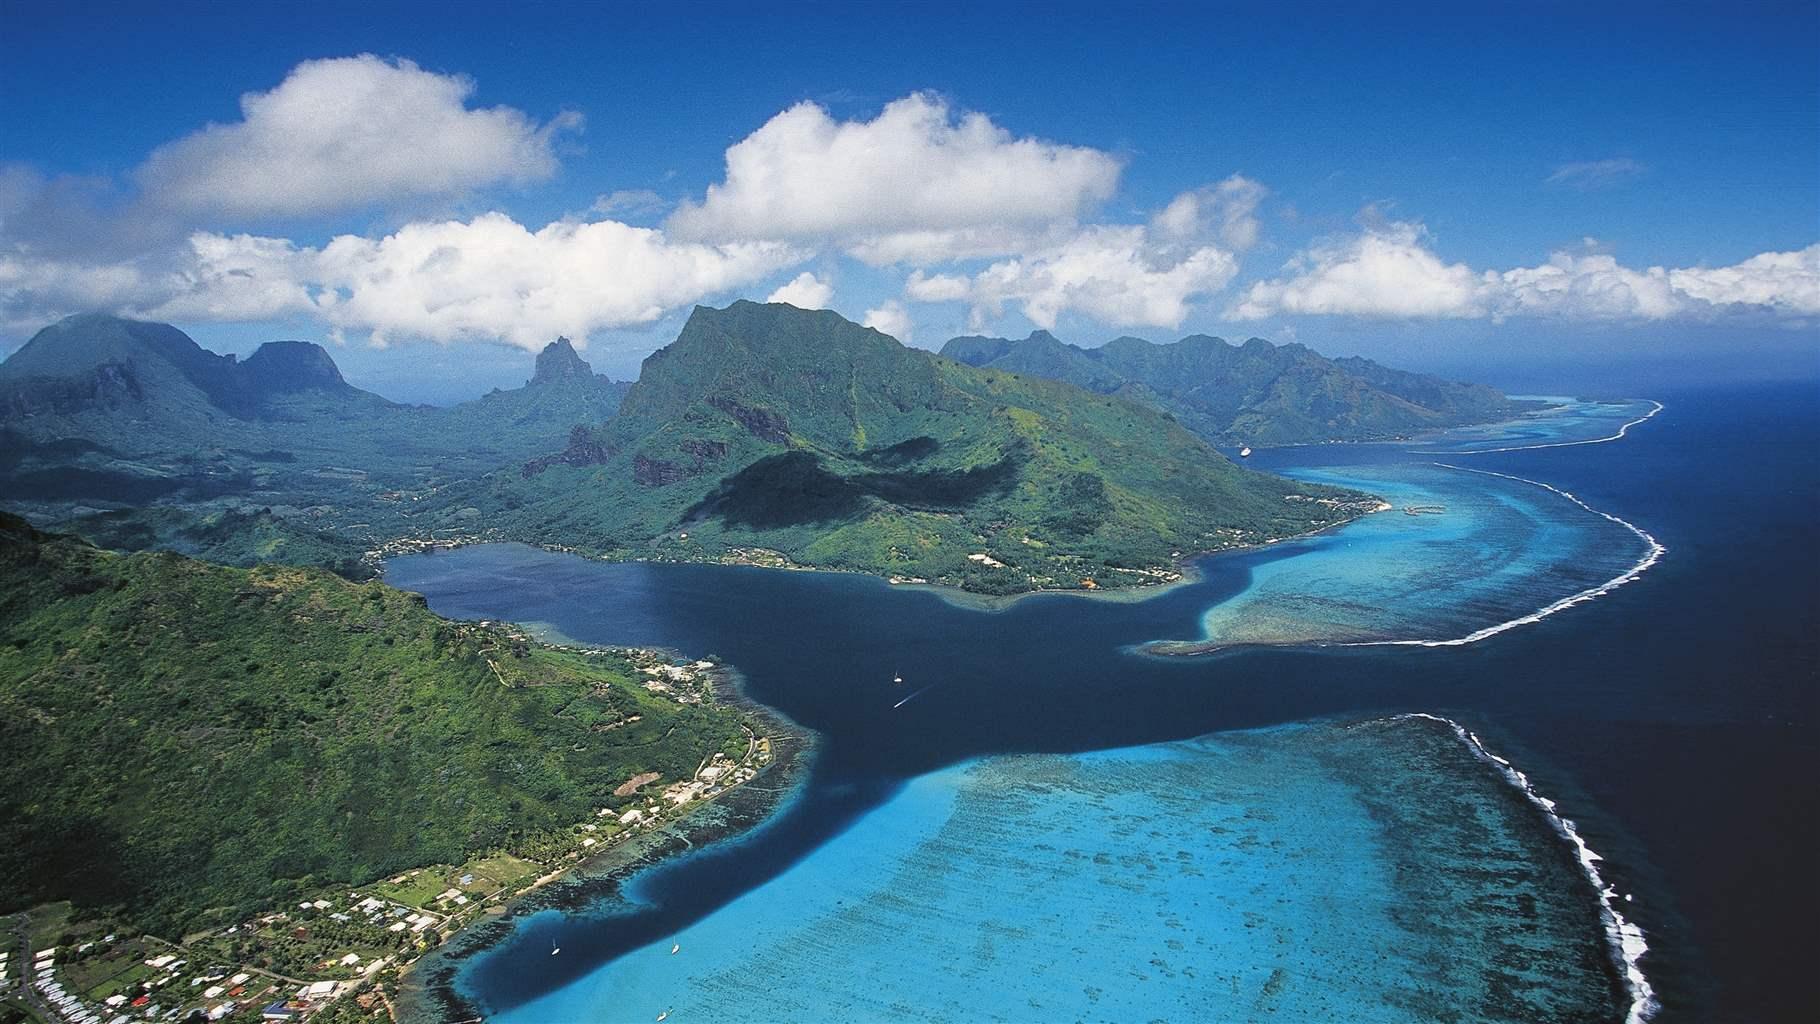 Aerial view of Cook's Bay with its coral reef, Moorea, Society Islands, French Polynesia, Overseas Territory of France.